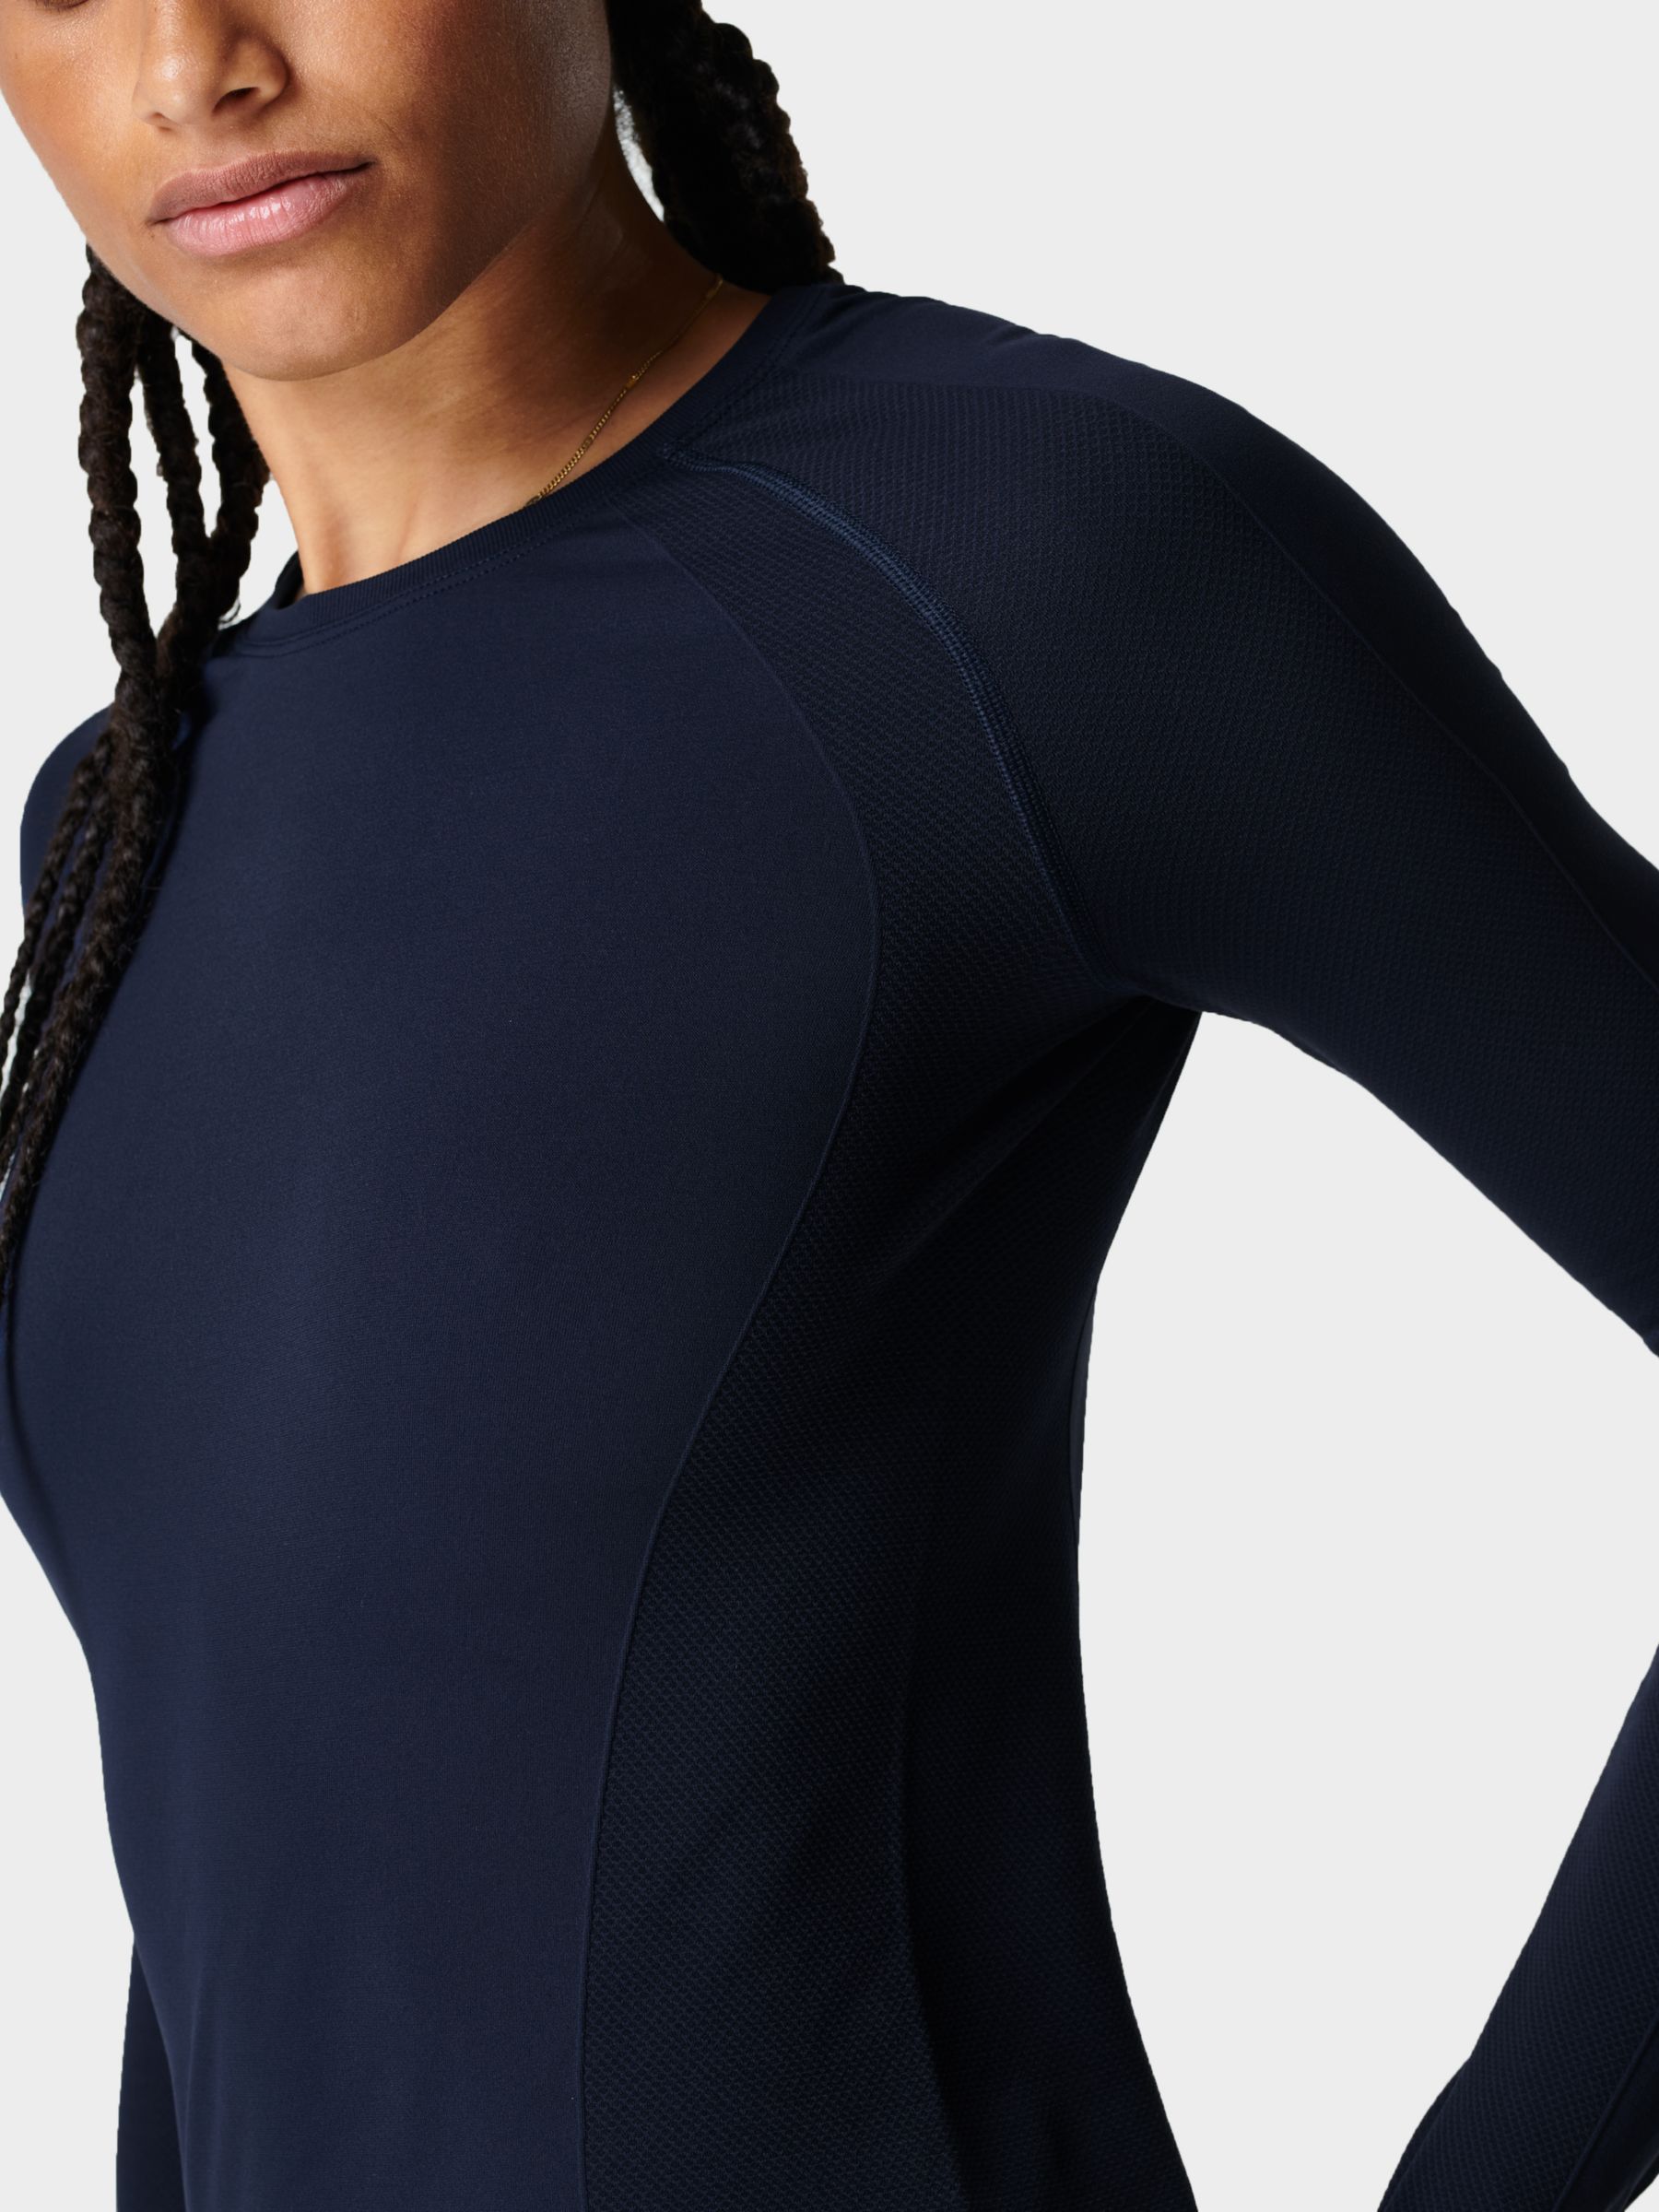 Sweaty Betty Athlete Seamless Long Sleeve Gym Top, Navy Blue at